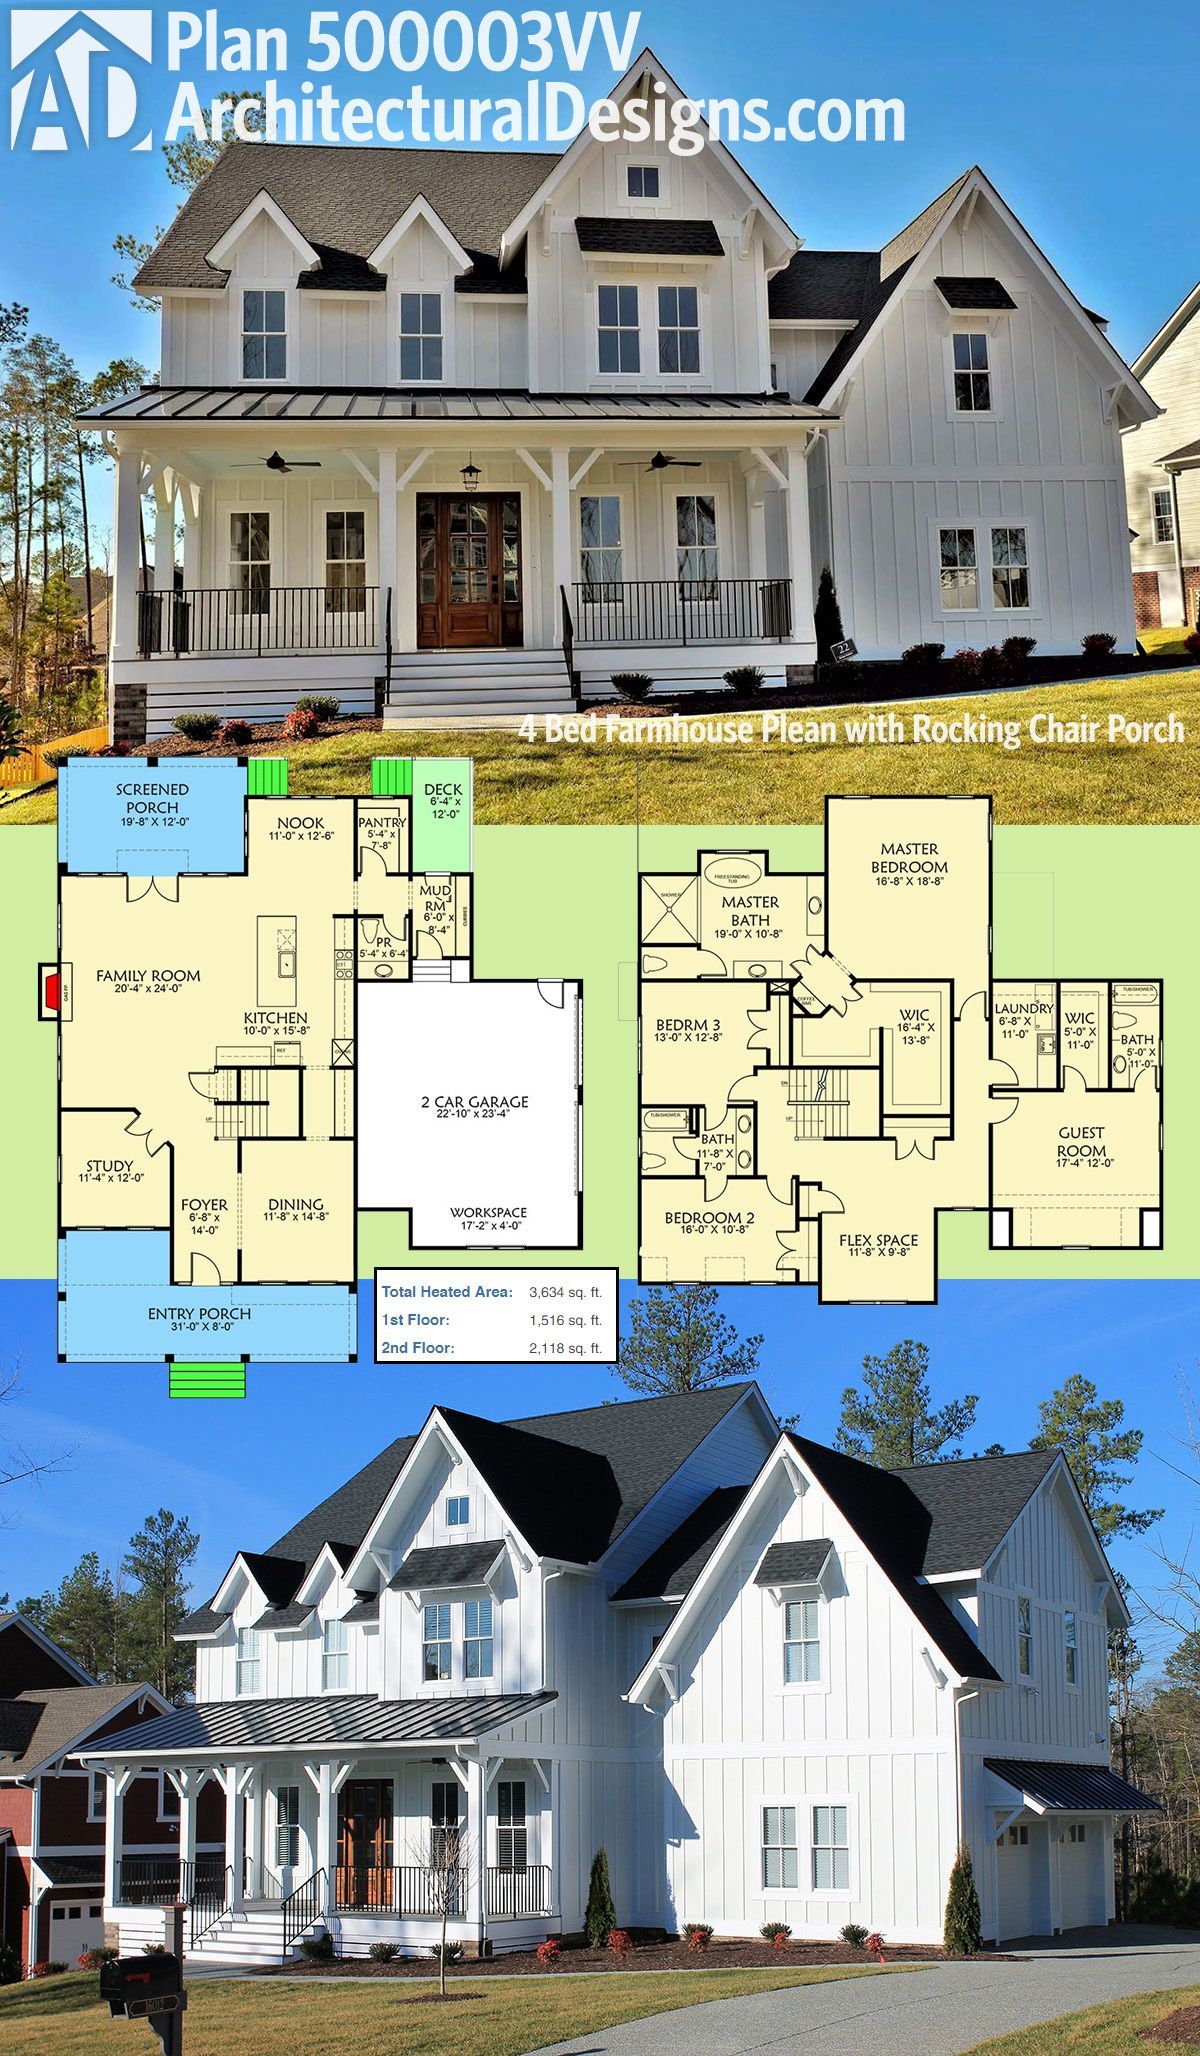 Architectural Designs Modern Farmhouse Plan 500003VV has a front porch that just screams “put my rocking chair on it”. All 4 beds